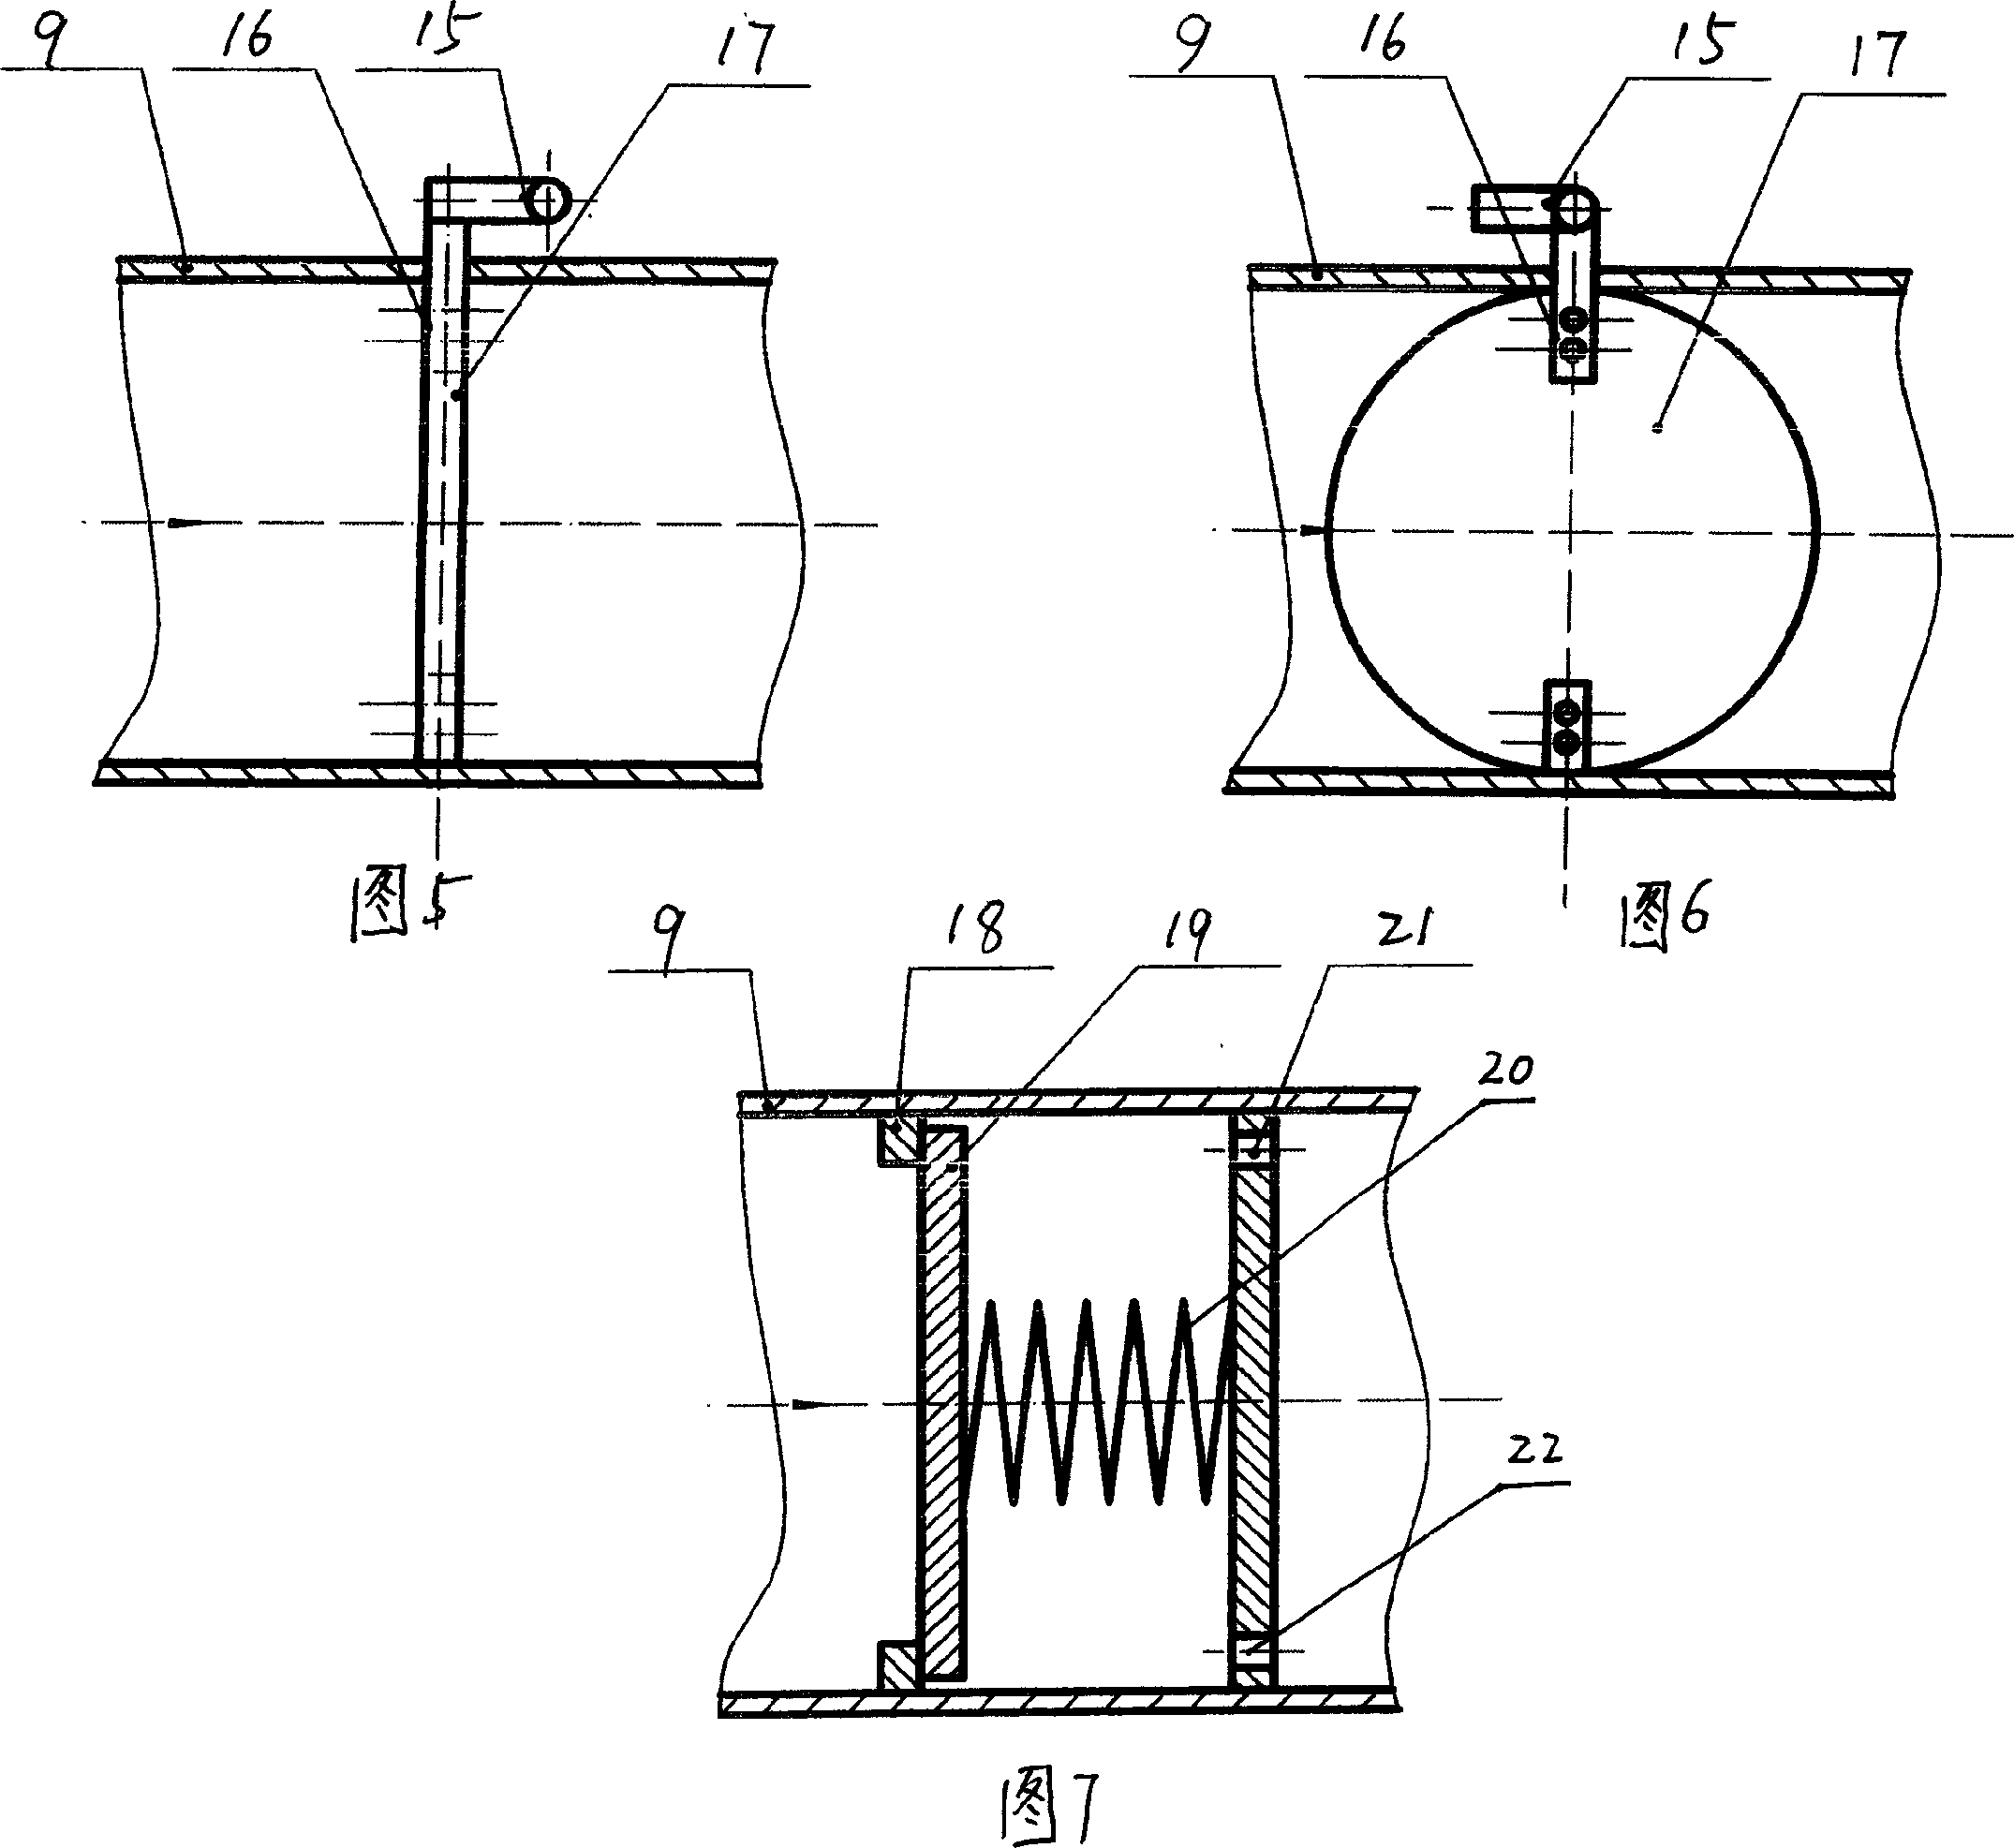 Internal combustion engine exhaust silencer with variable exhaust pipe cross section